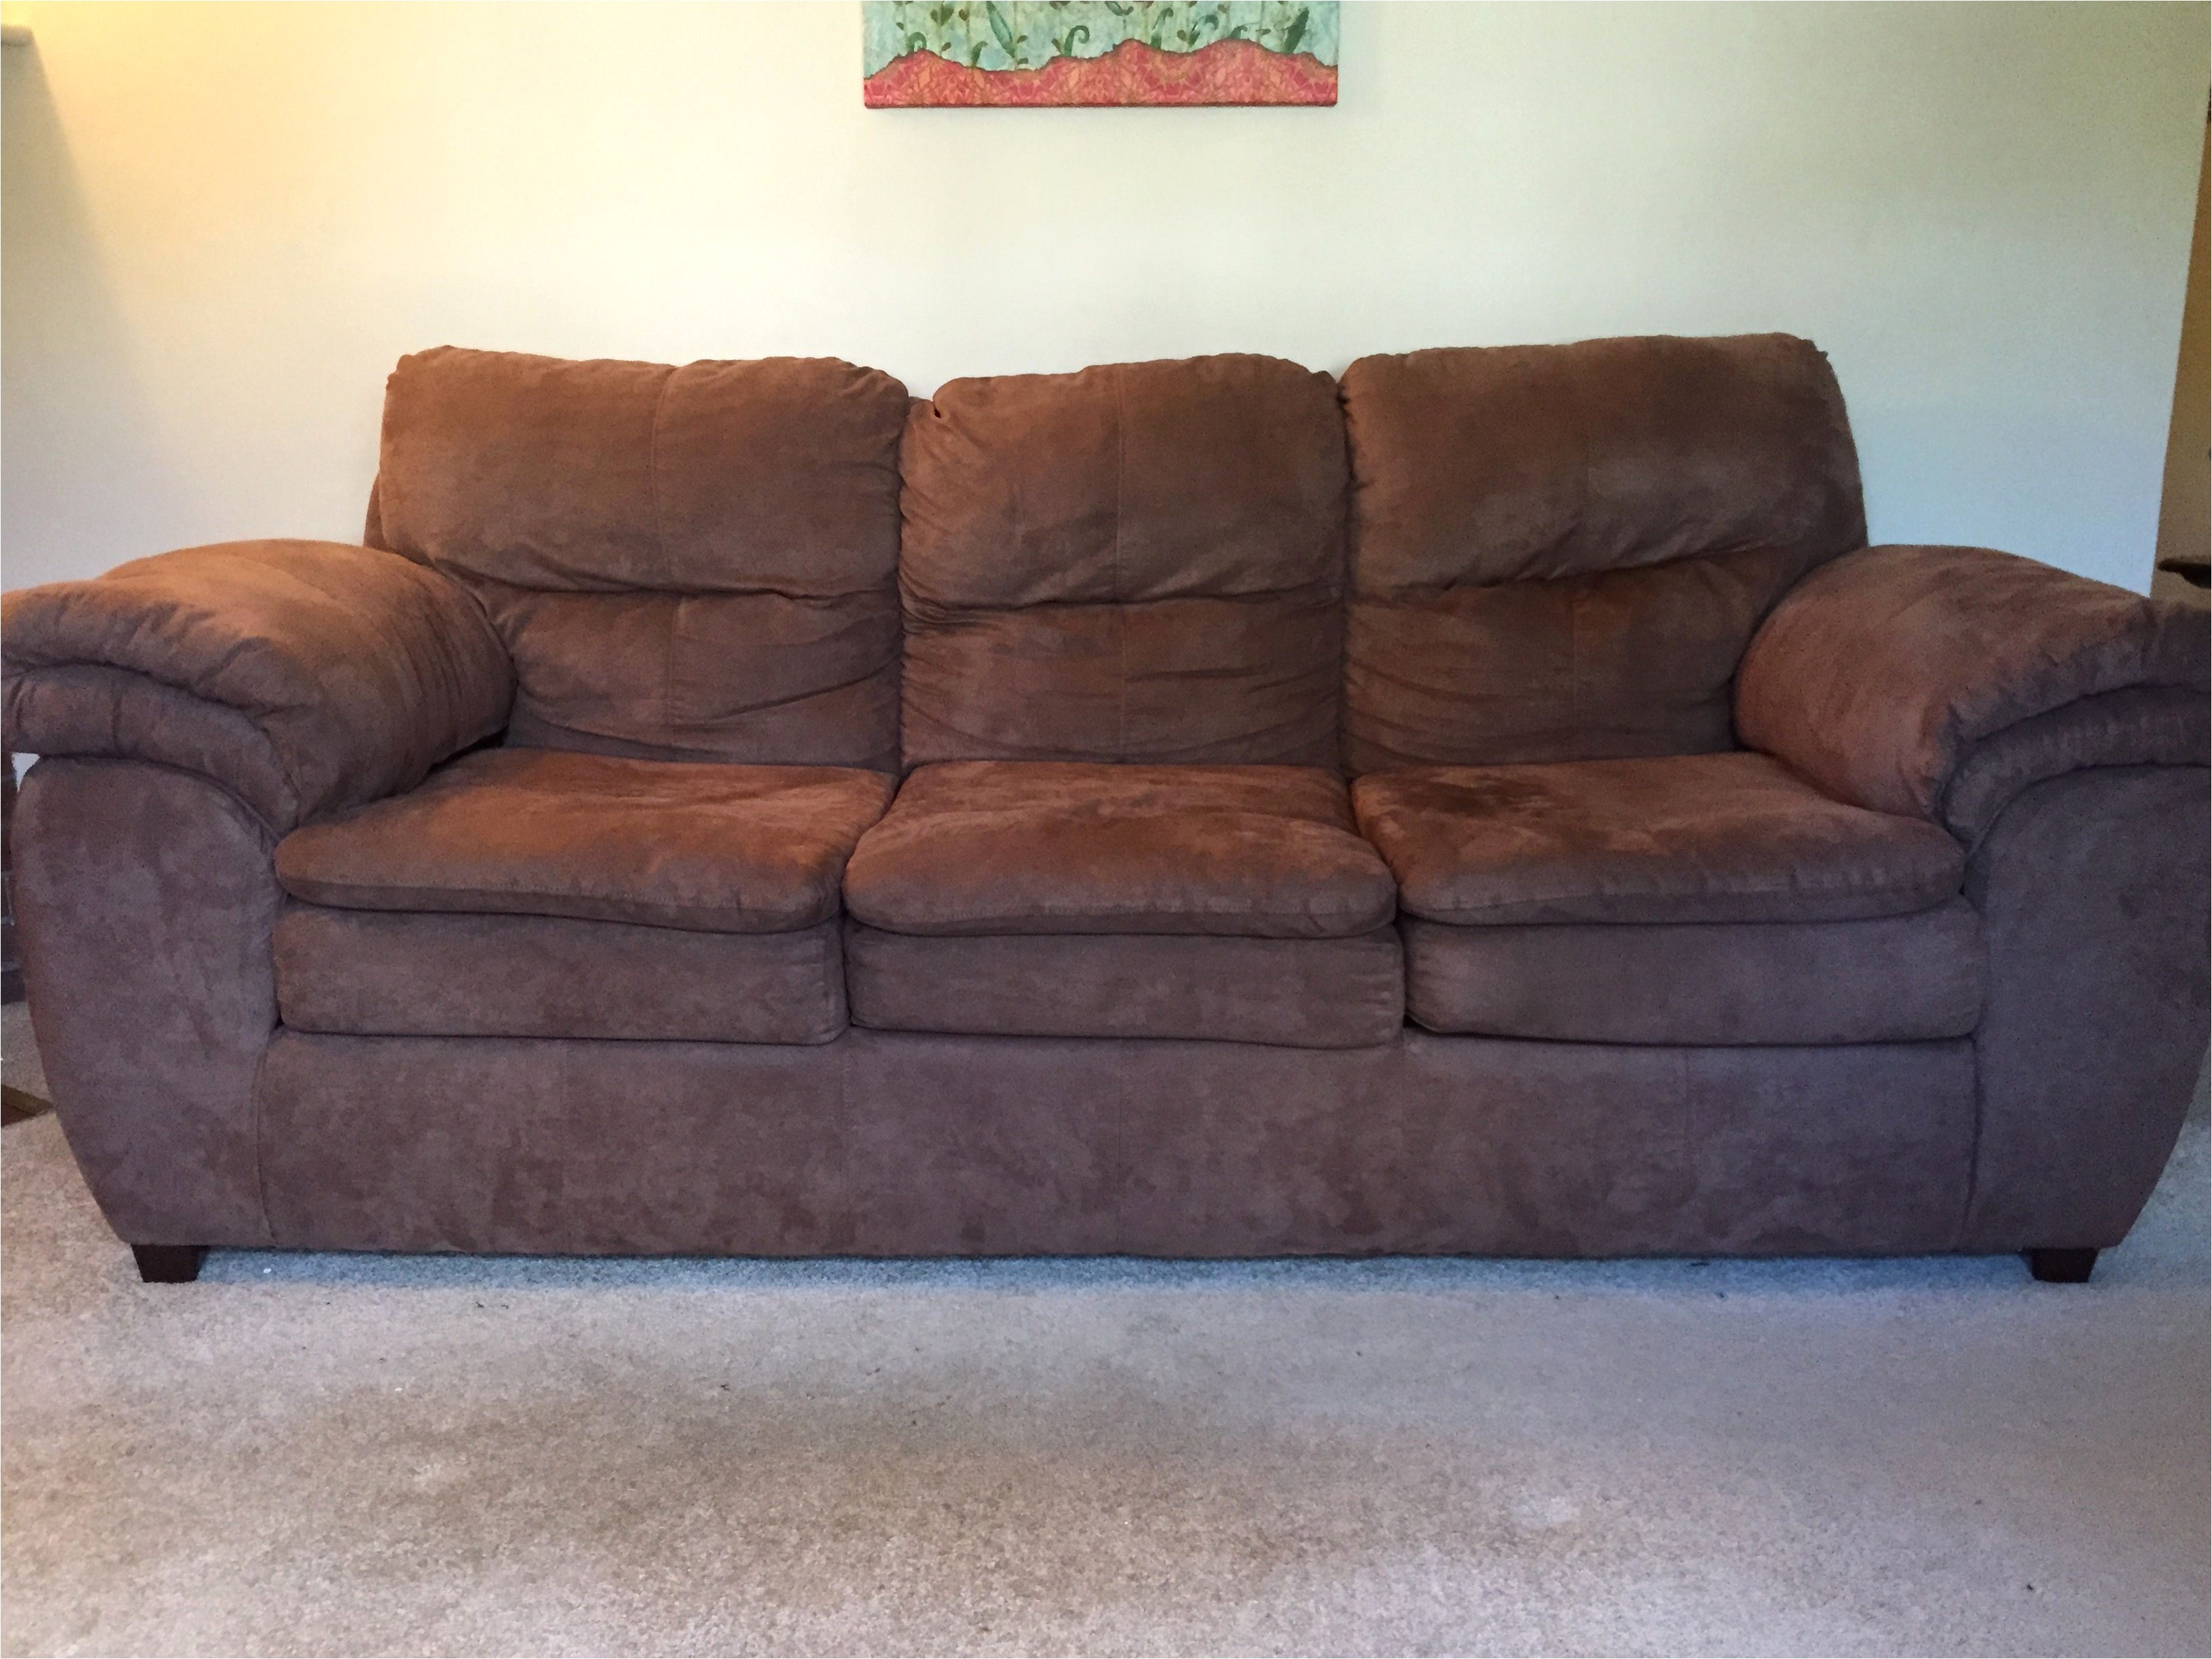 awesome microfiber sofas for sale furniture lovely brown microfiber couch with superb color